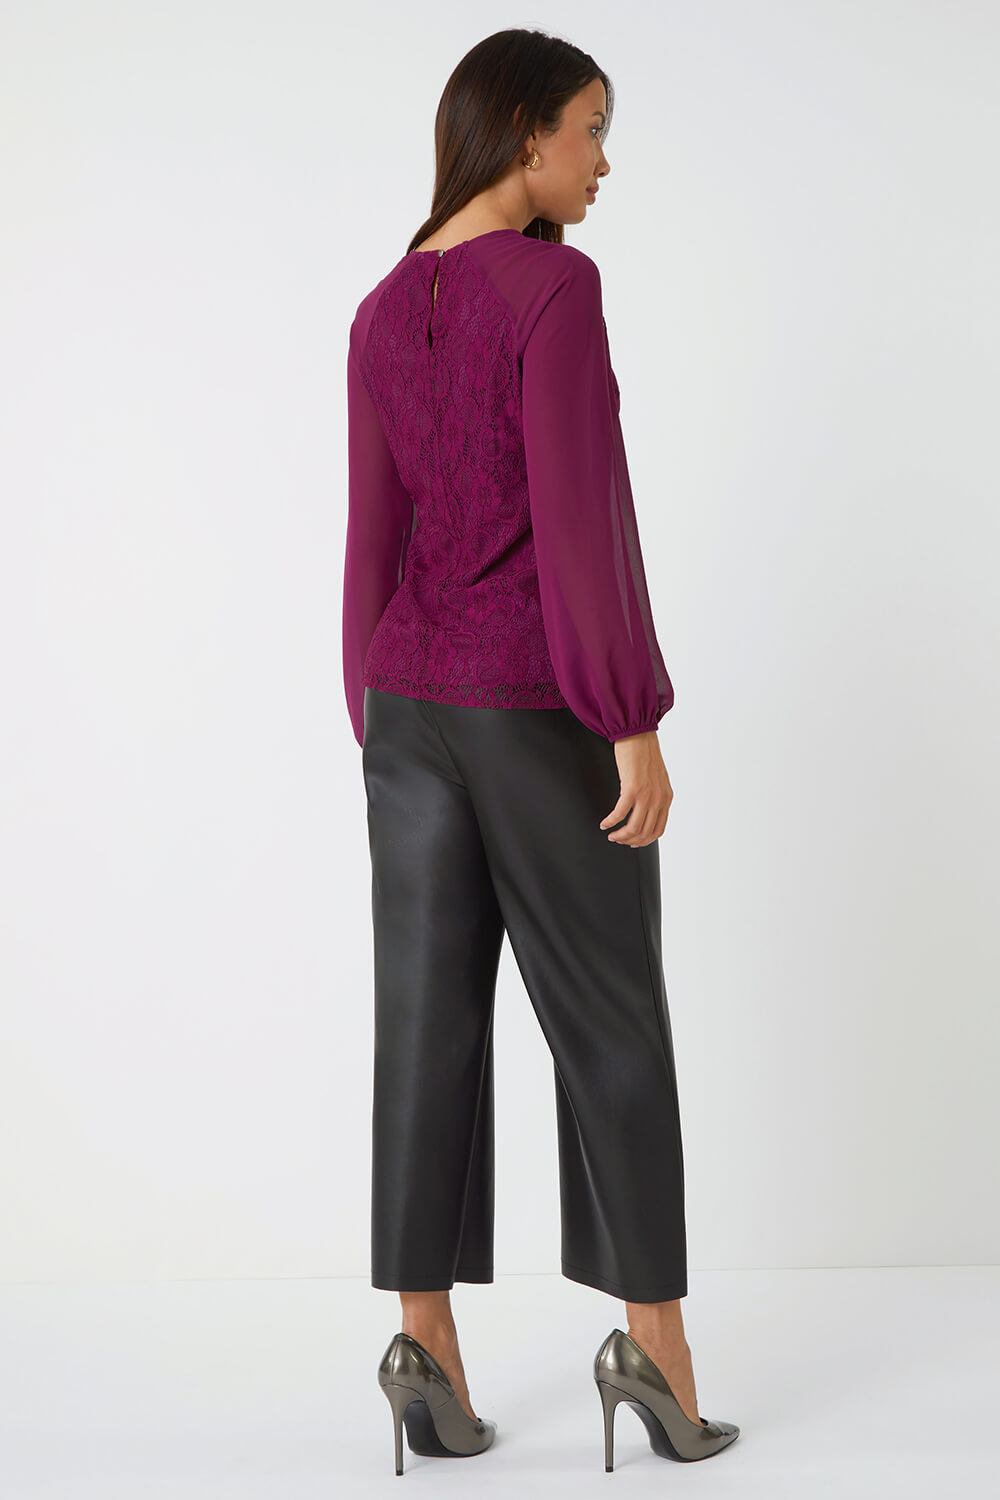 Purple Lace Detail Chiffon Sleeve Stretch Top, Image 3 of 5